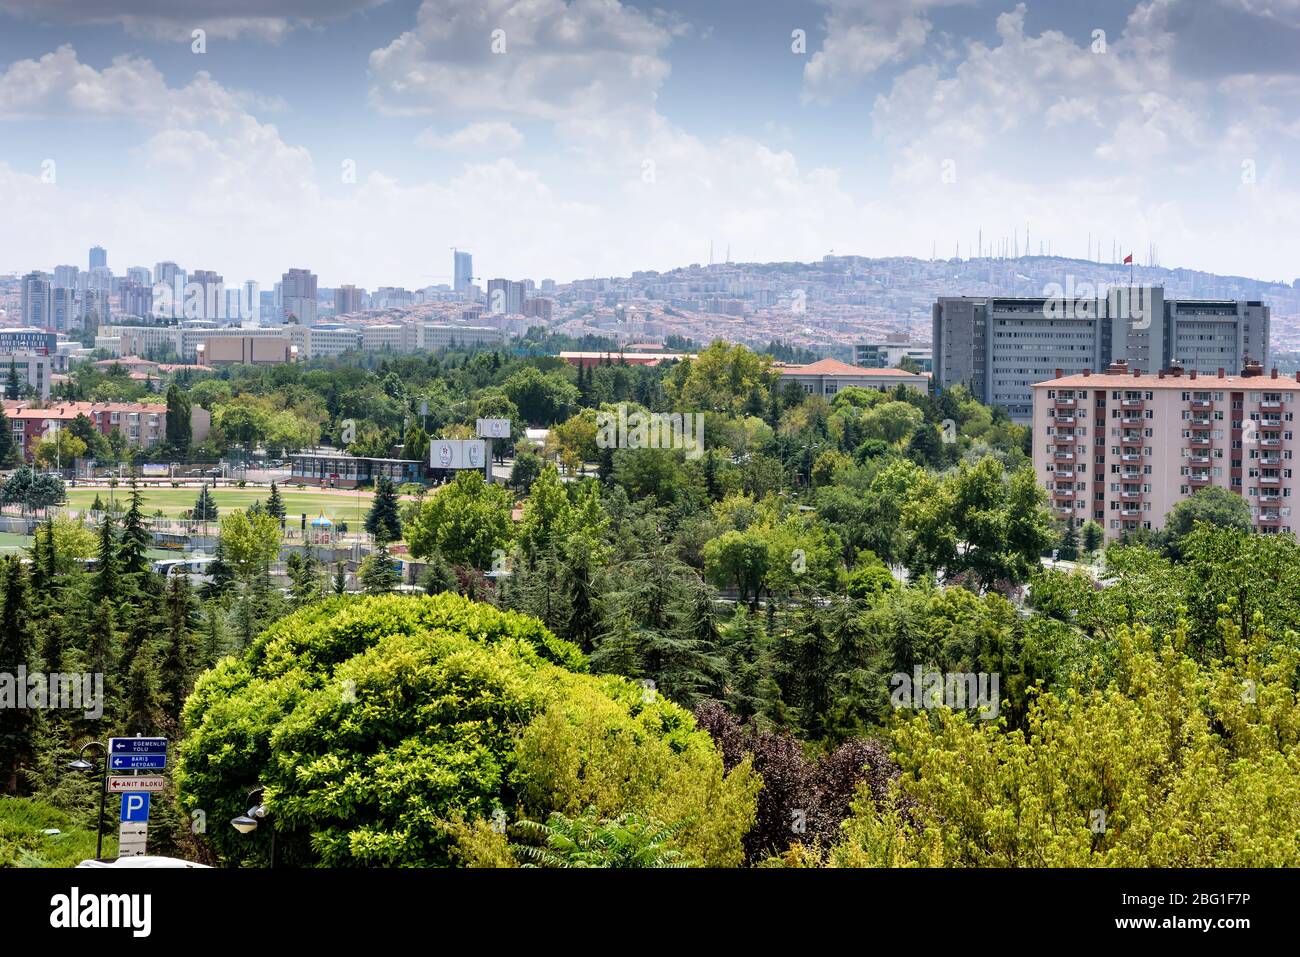 Ankara, Turkey - July 24, 2018: View above of Ankara houses with tiled roofs and skyscrapers Stock Photo